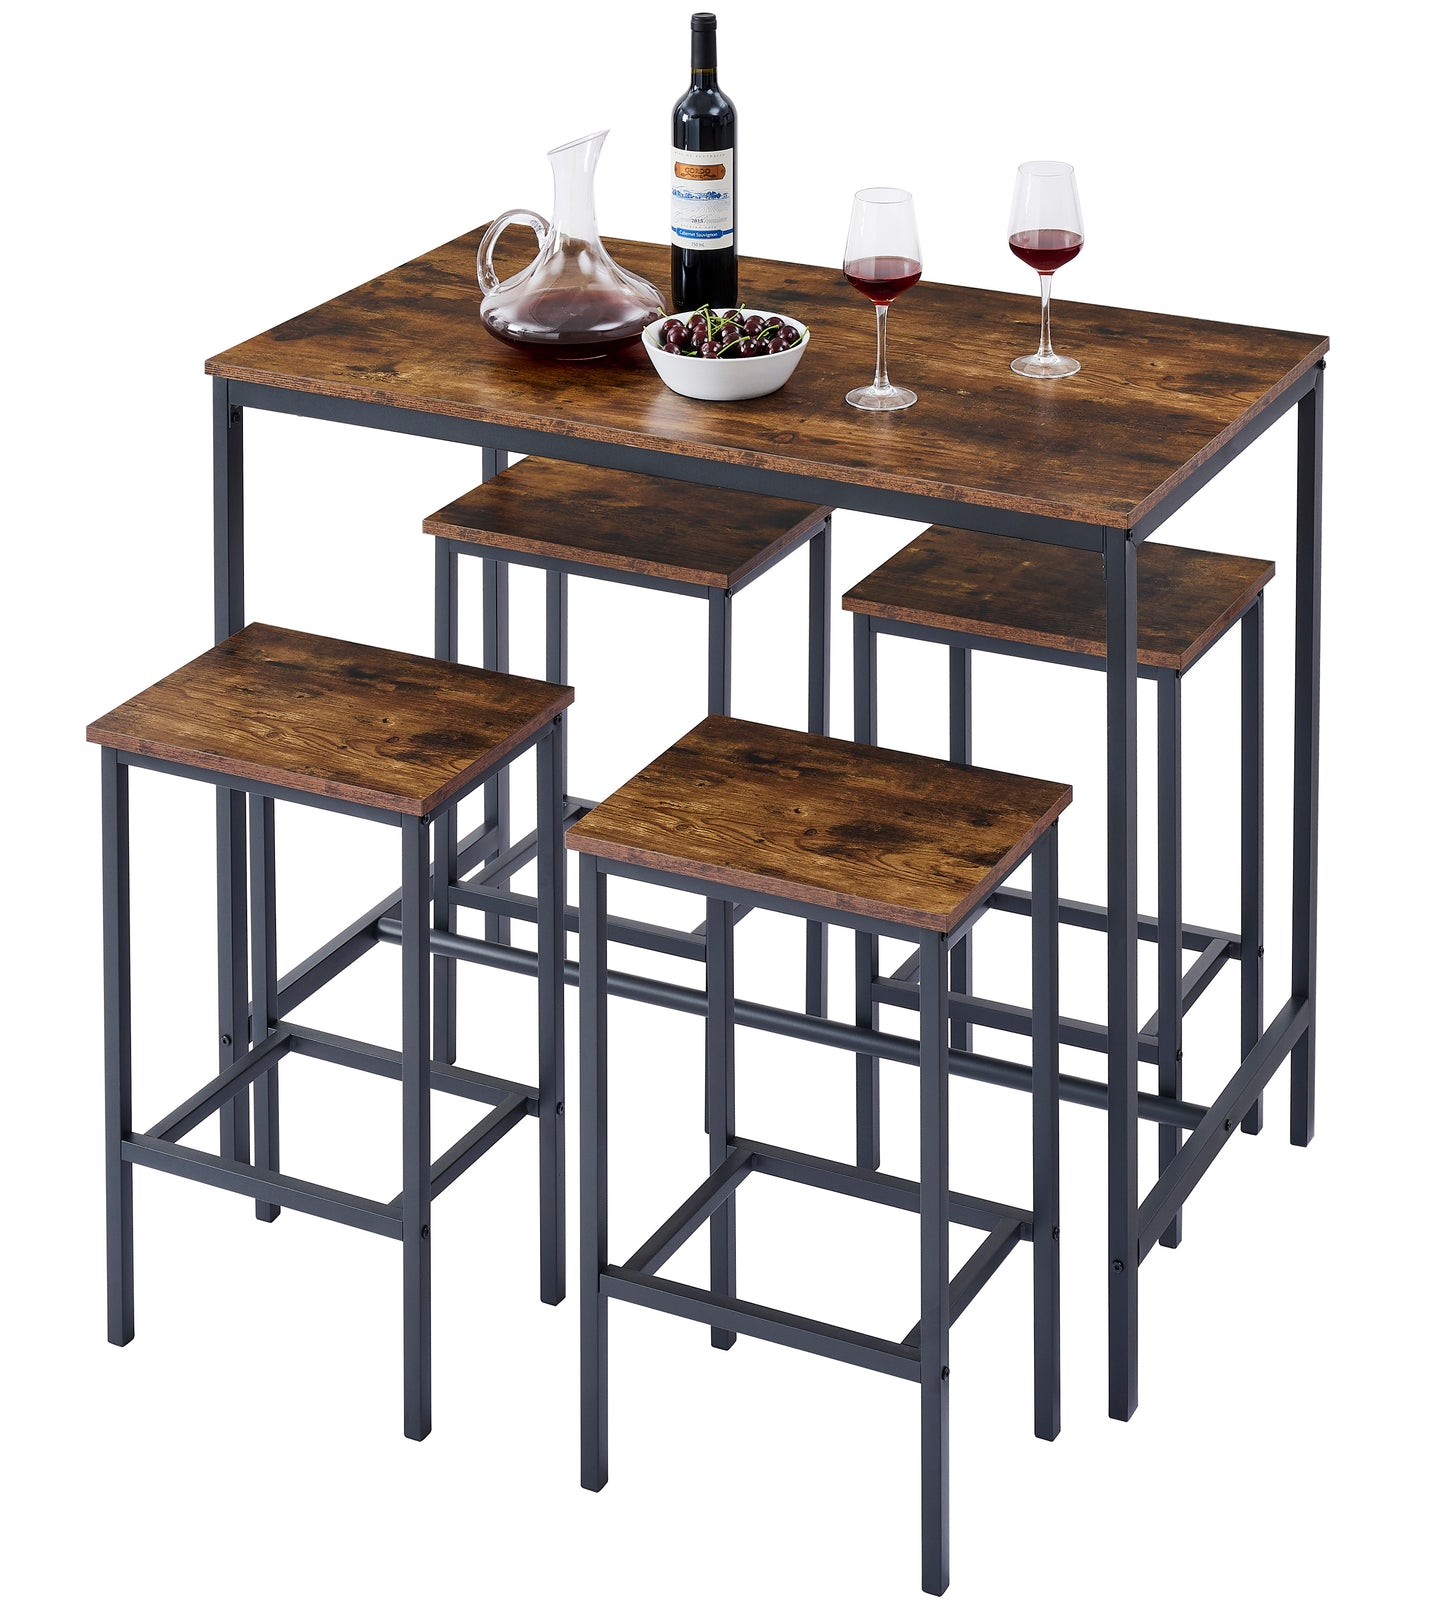 5PC Dinging table set with high stools, structural strengthening, industrial style. Rustic Brown,41.73"L x 23.62"W x 35.23"H